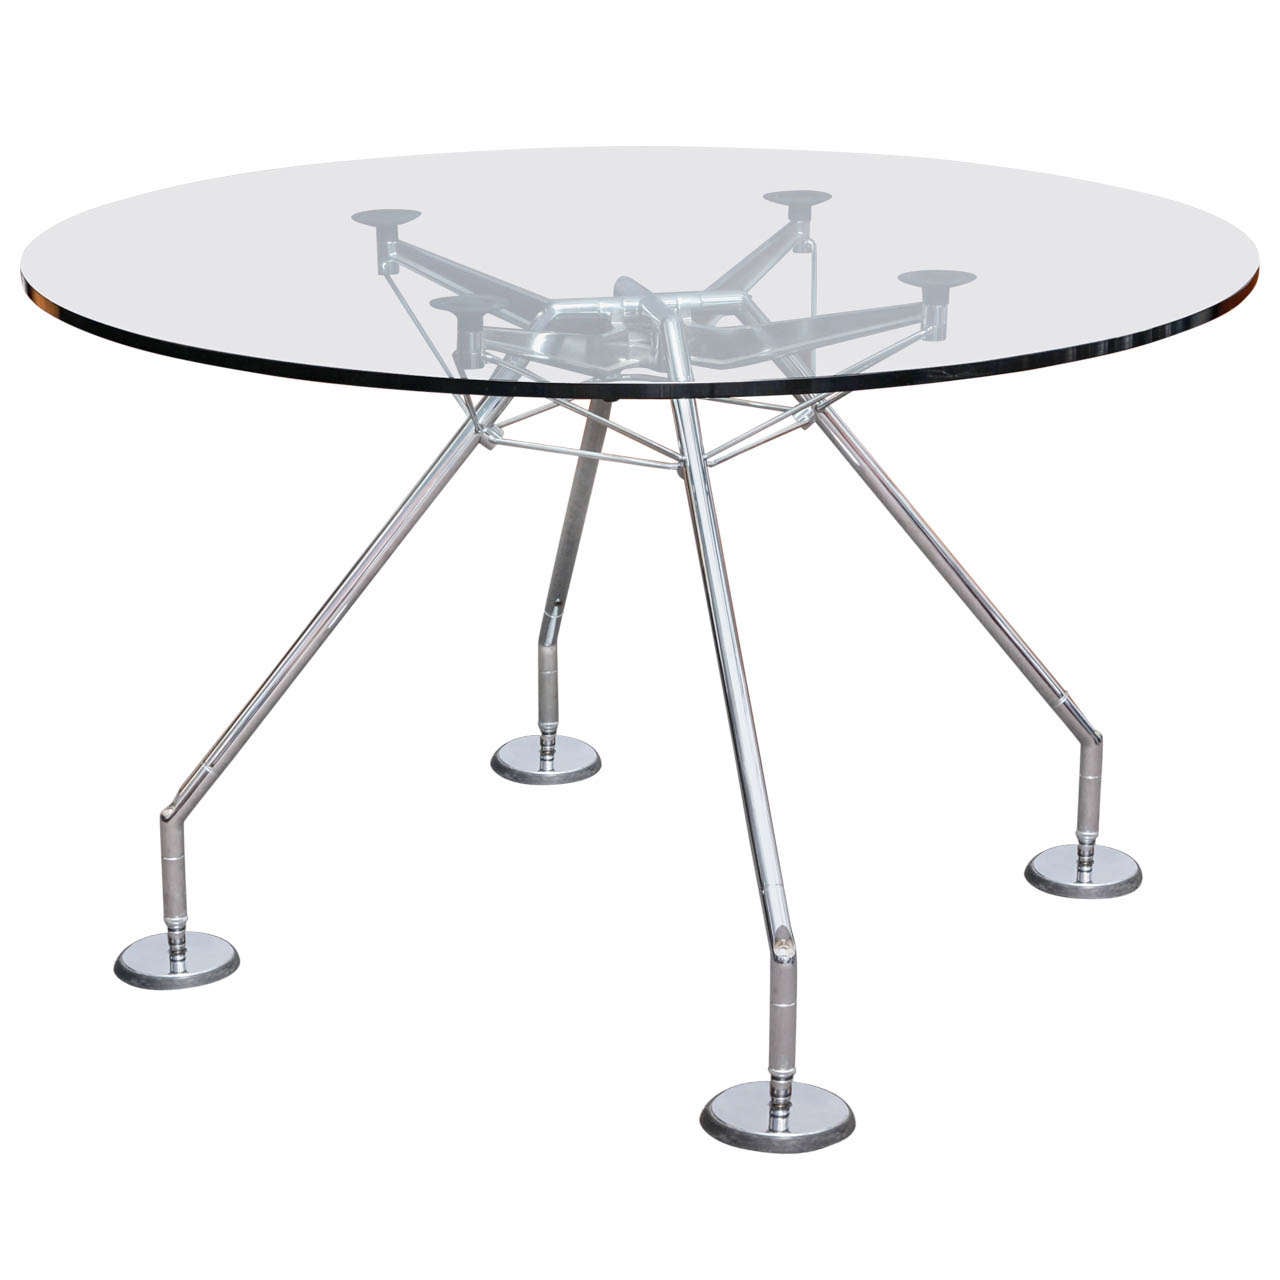 The Nomos Table designed by Norman Foster For Sale